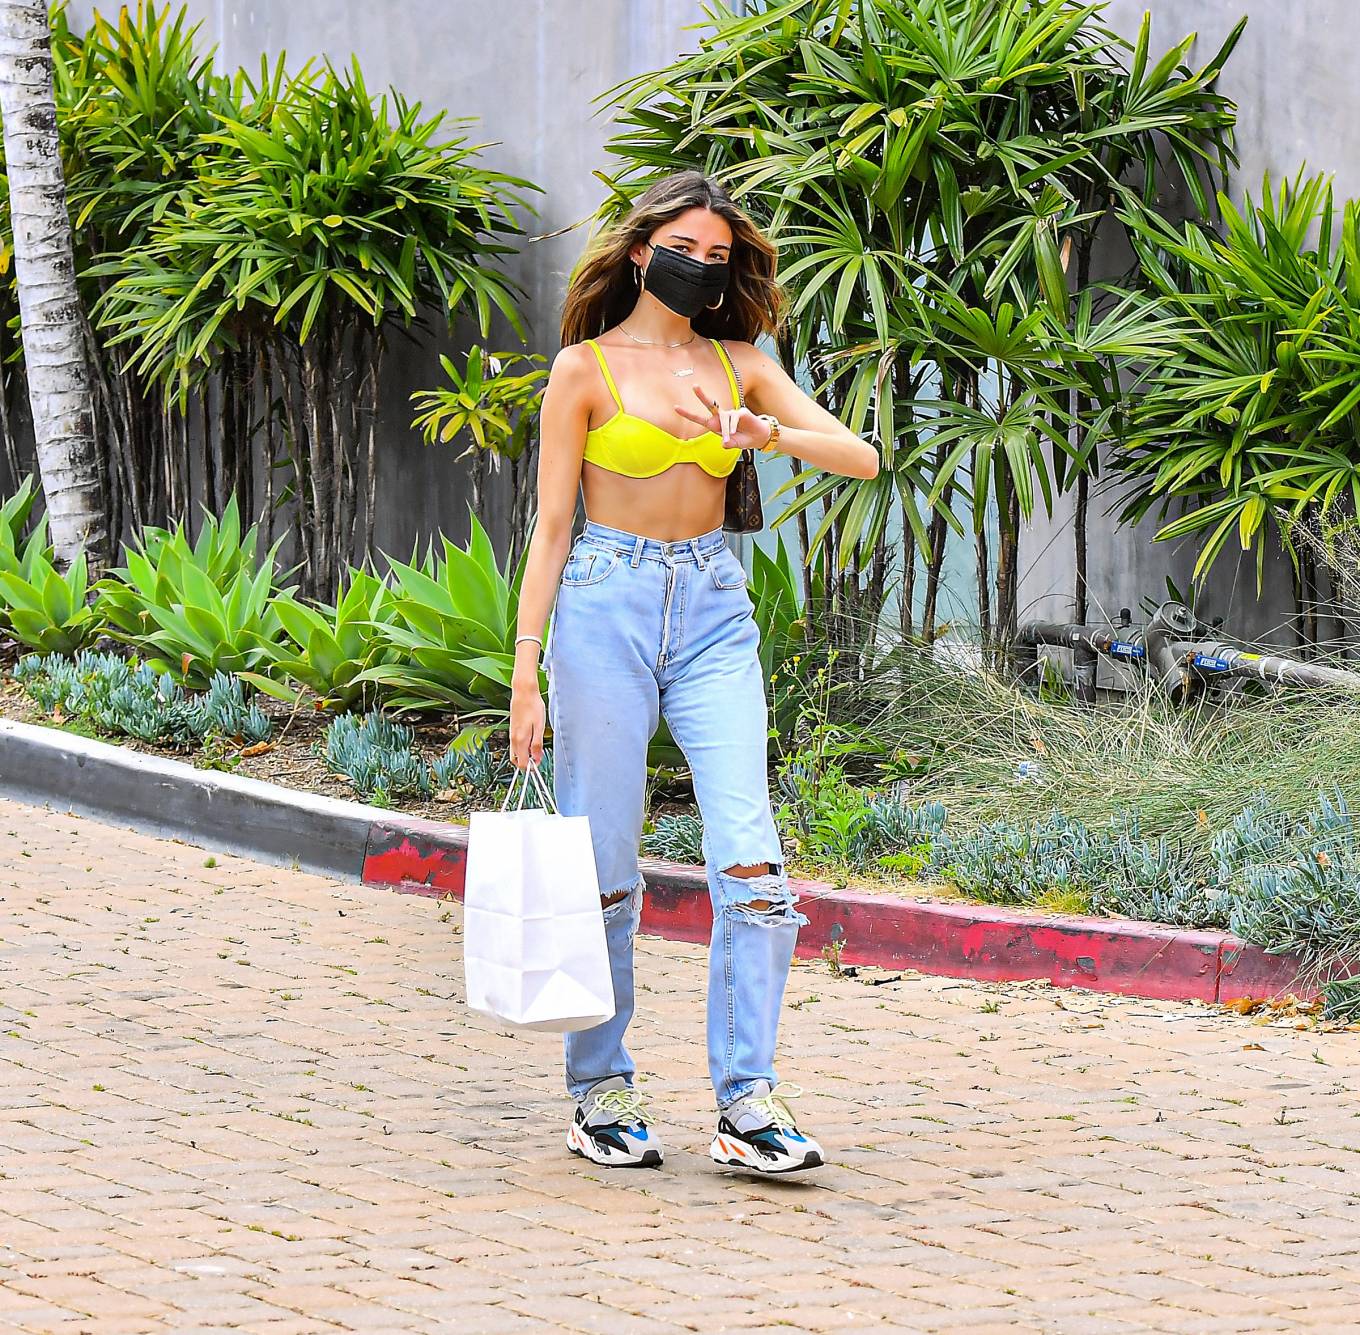 Madison Beer In A Surgical Mask And Yellow Bikini Top As She Grabs